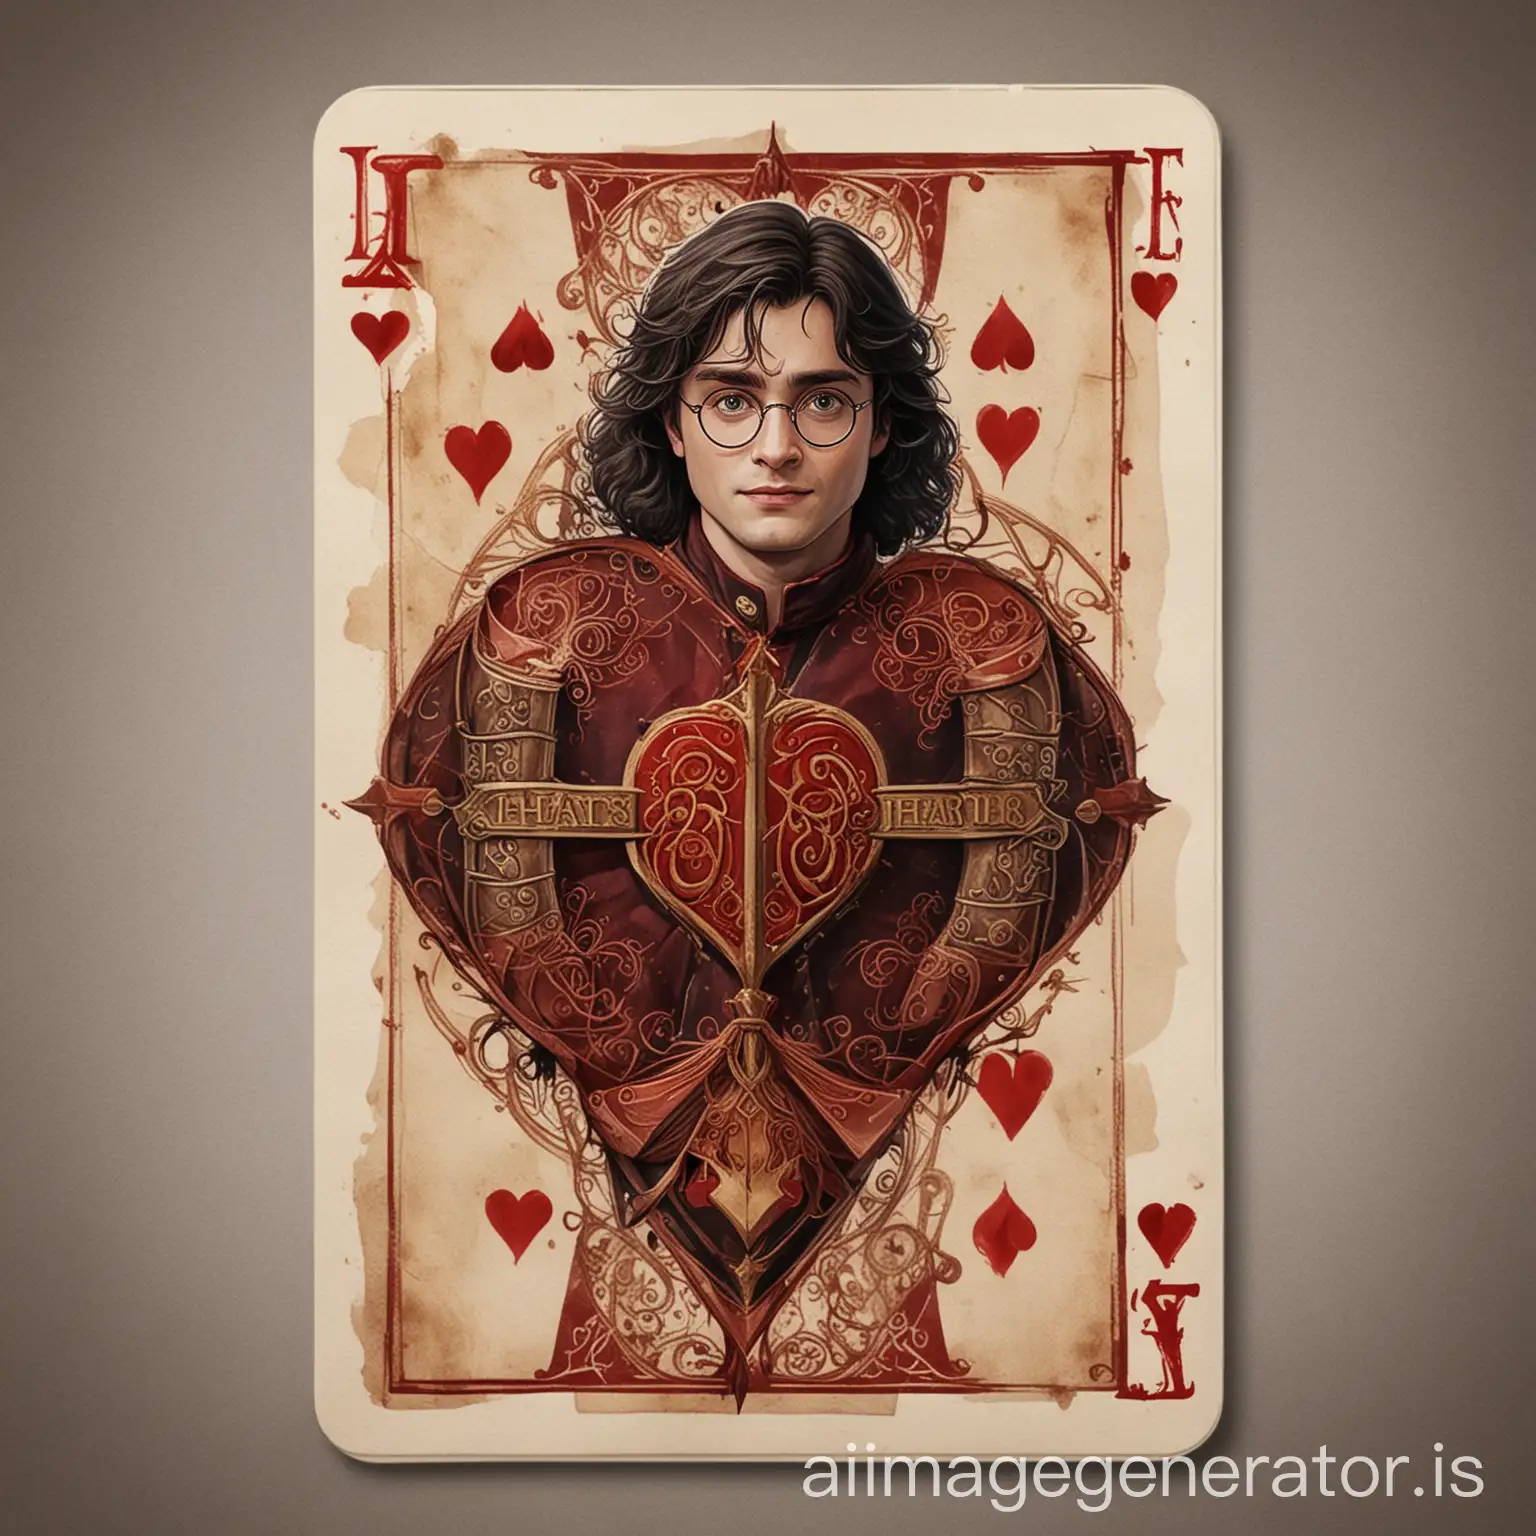 ace of hearts as harry potter